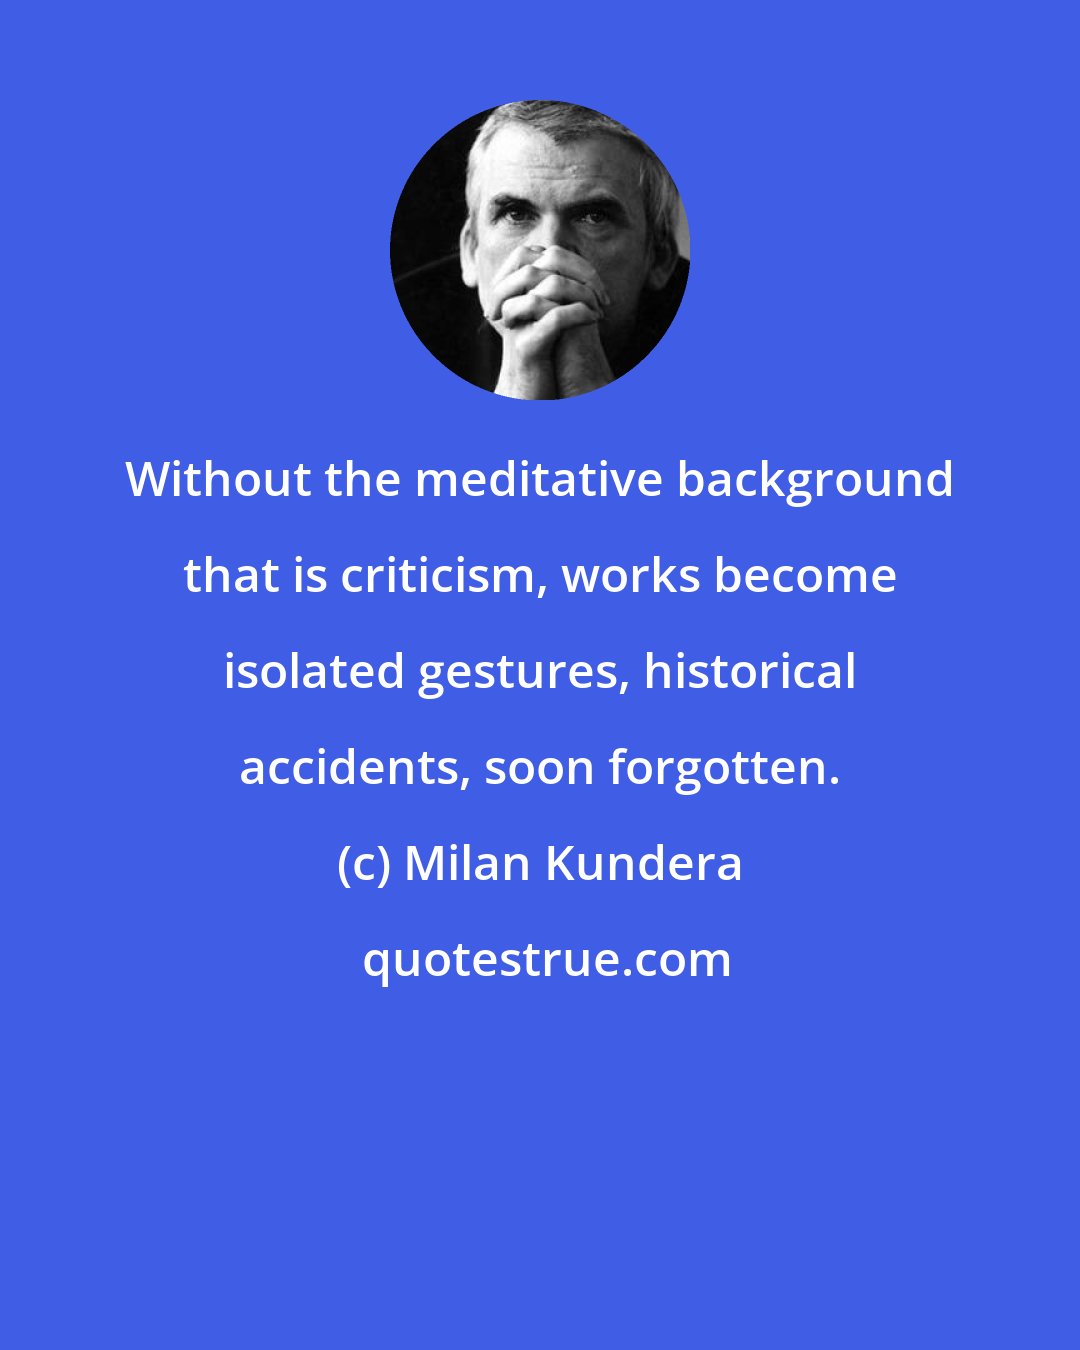 Milan Kundera: Without the meditative background that is criticism, works become isolated gestures, historical accidents, soon forgotten.